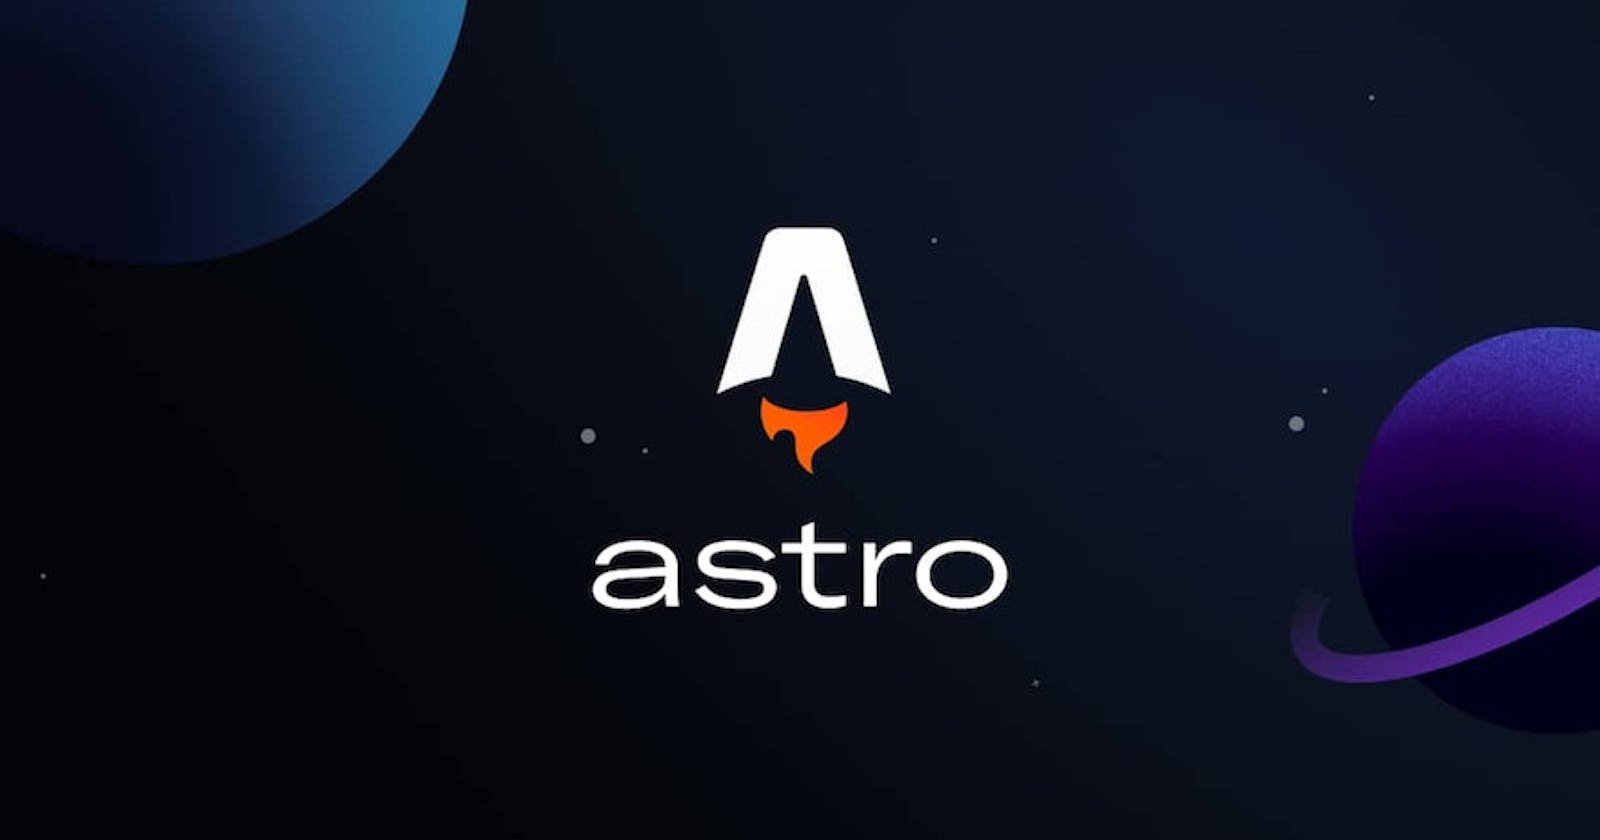 Astro JS Framework: Overview of the tool I used to built my site